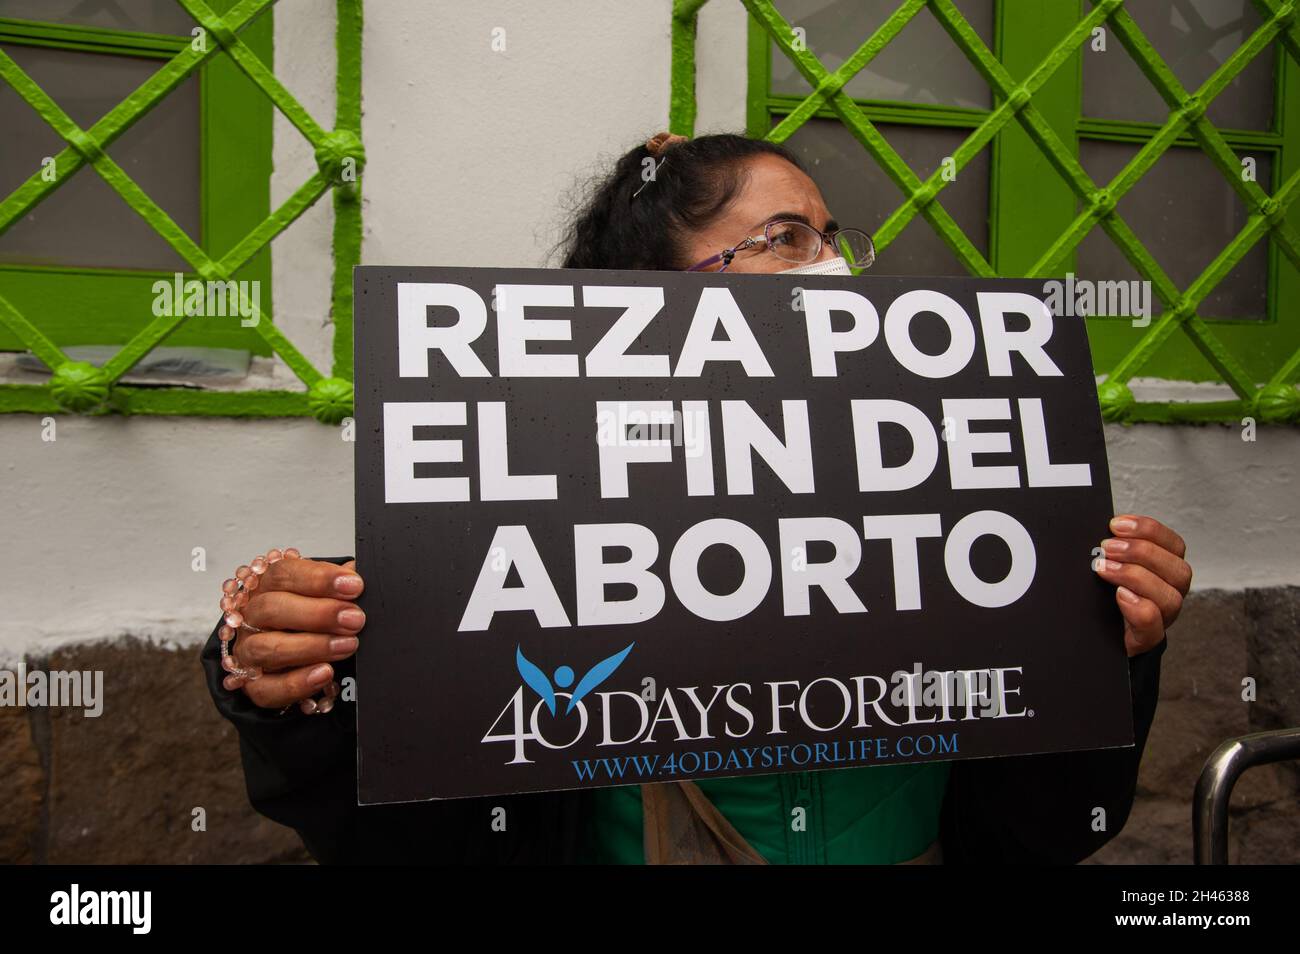 A group of people protests outside Profamilia, family planification health center in Bogota against the practice of abortions in Colombia with a sign that reads 'Pray for abortions to end' on October 30, 2021. Stock Photo